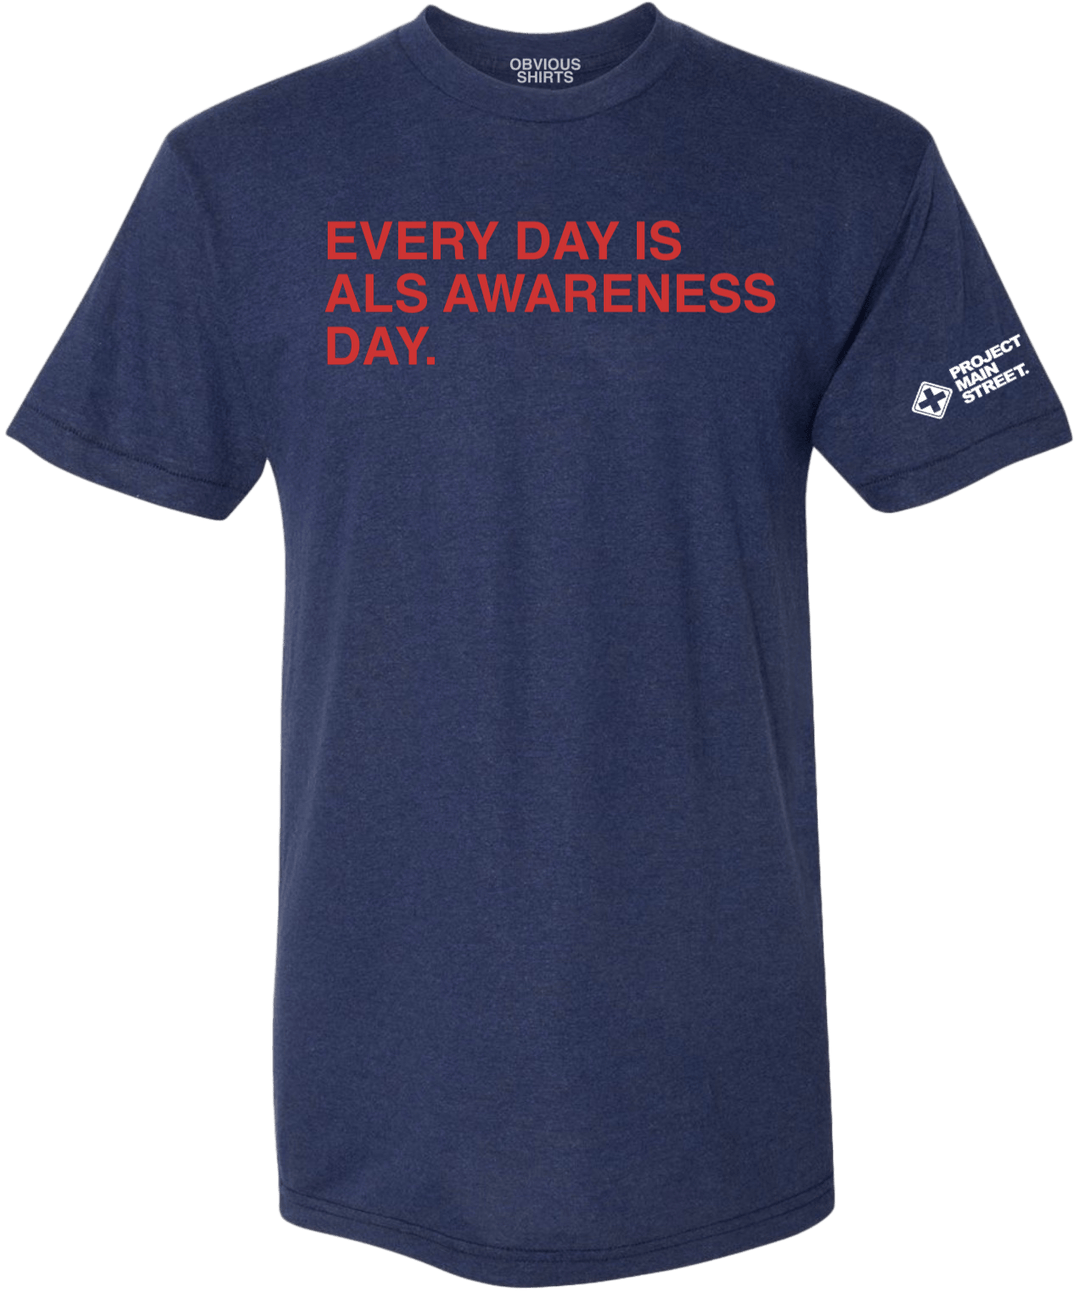 EVERY DAY IS ALS AWARENESS DAY. - OBVIOUS SHIRTS.